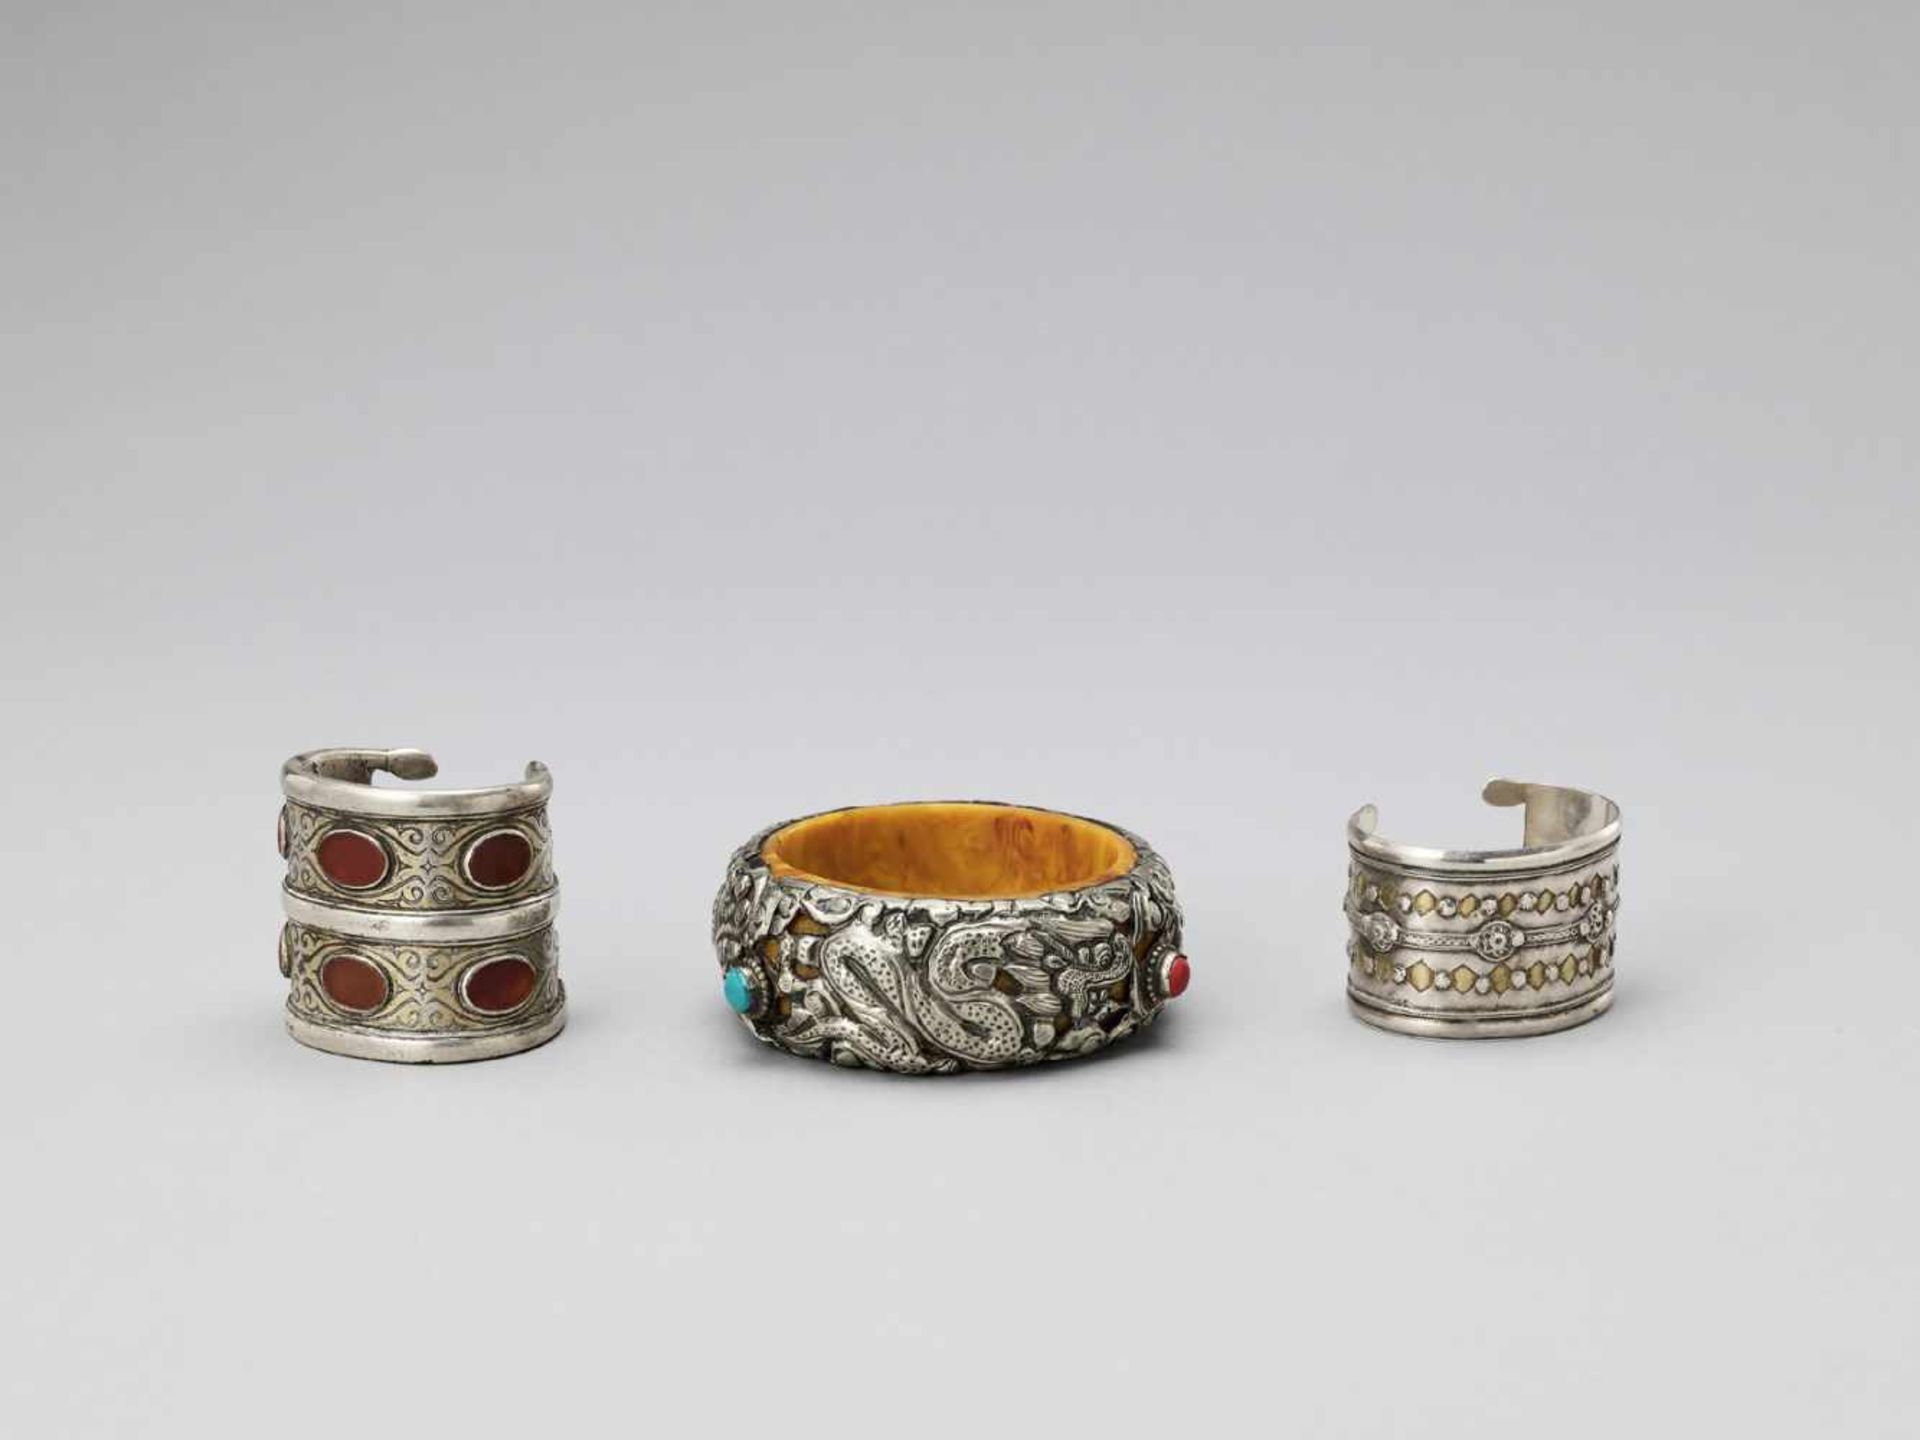 THREE PARCEL-GILT AND GEMSTONE-INLAID SILVER BANGLES, LATE 19TH TO EARLY 20TH CENTURY